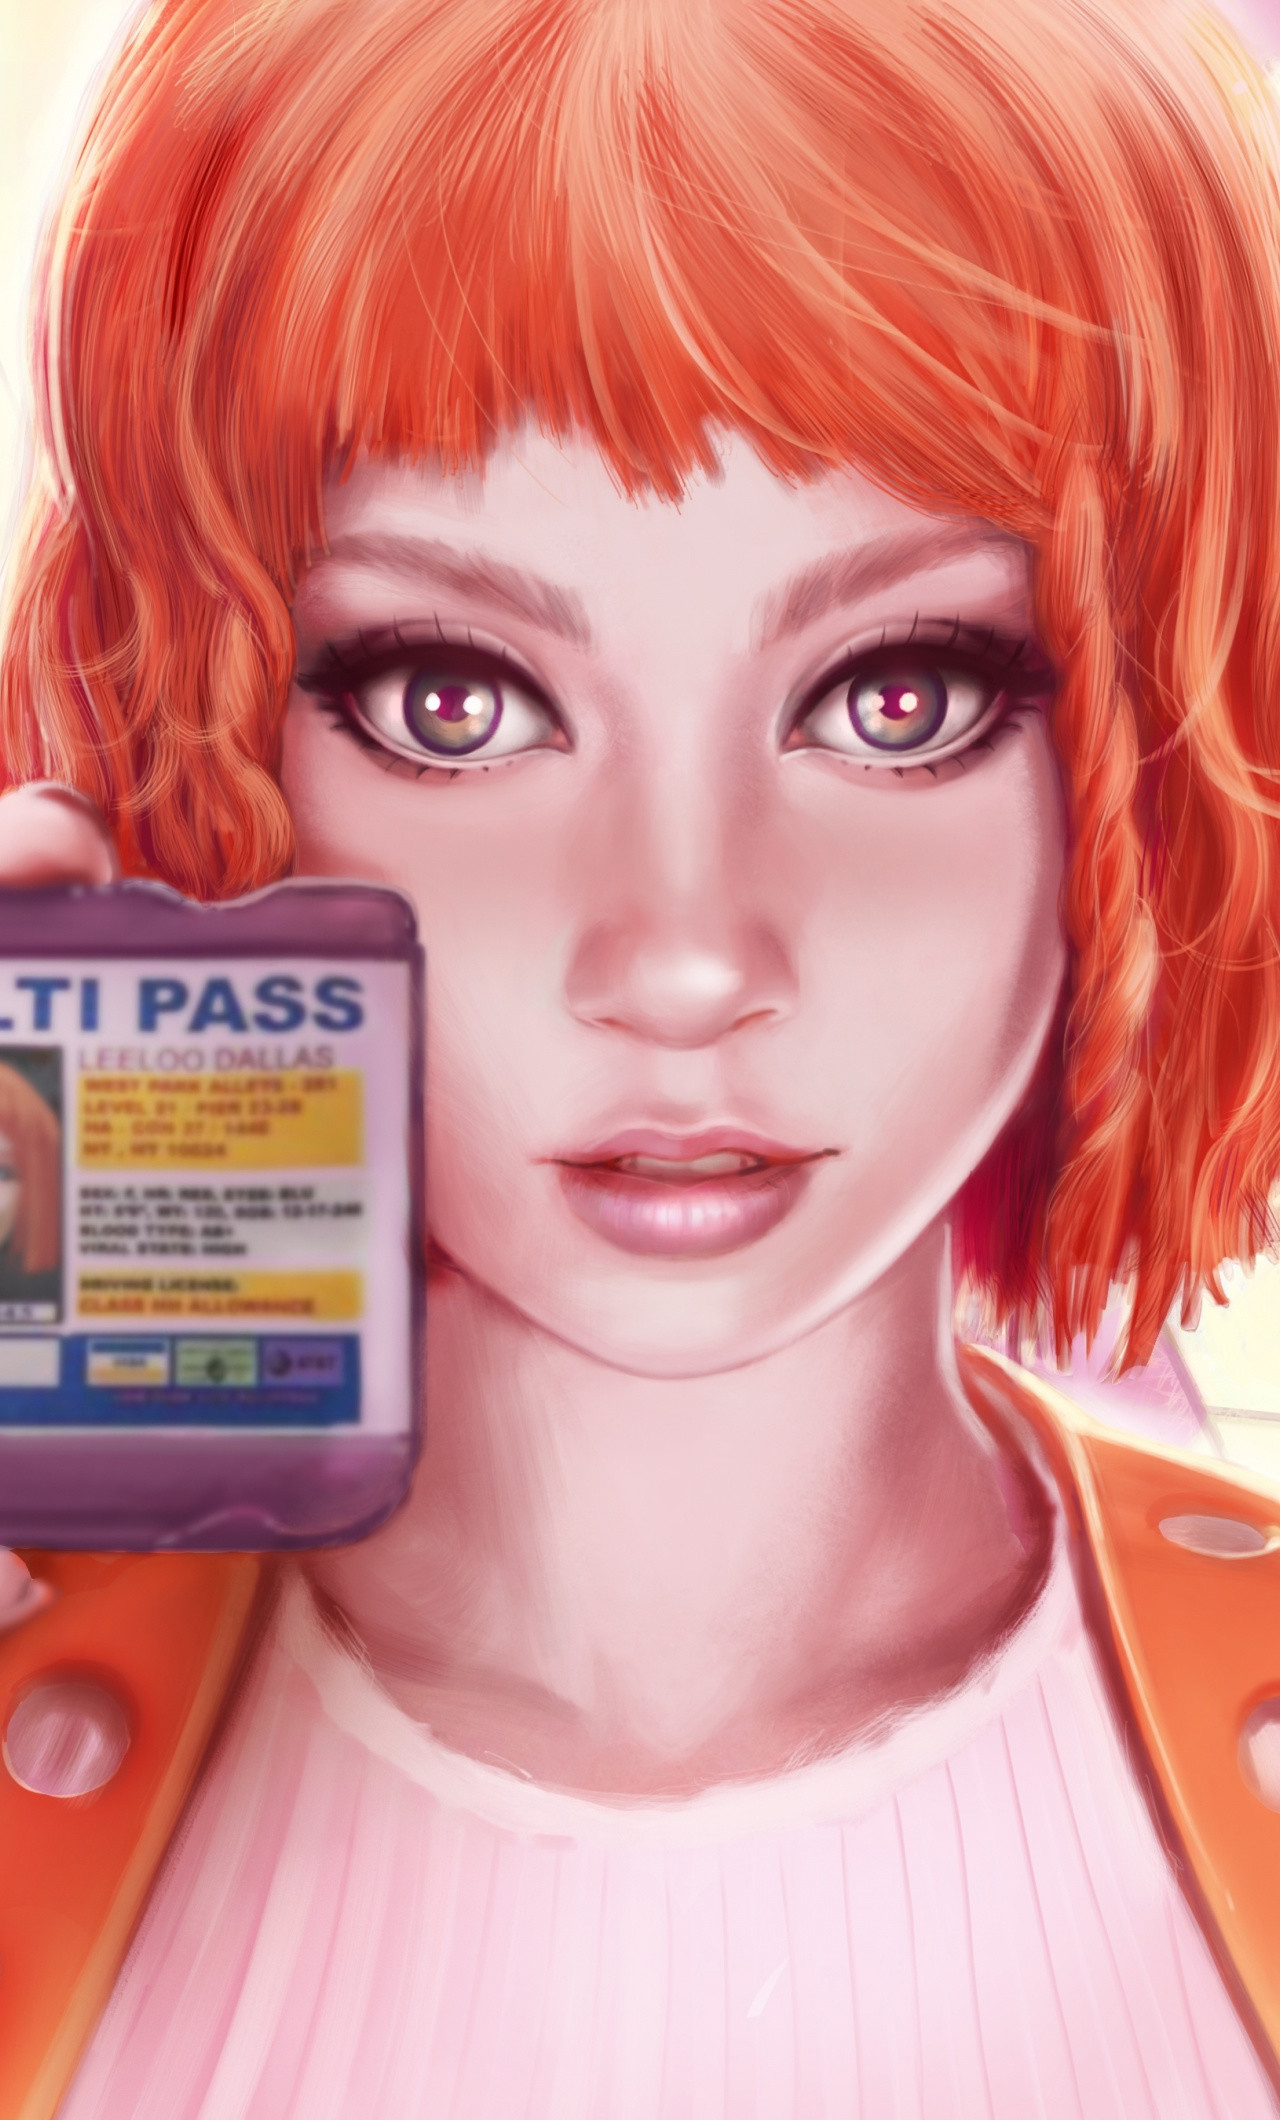 1280x2120  wallpaper Leeloo, The Fifth Element, movie, poster, art